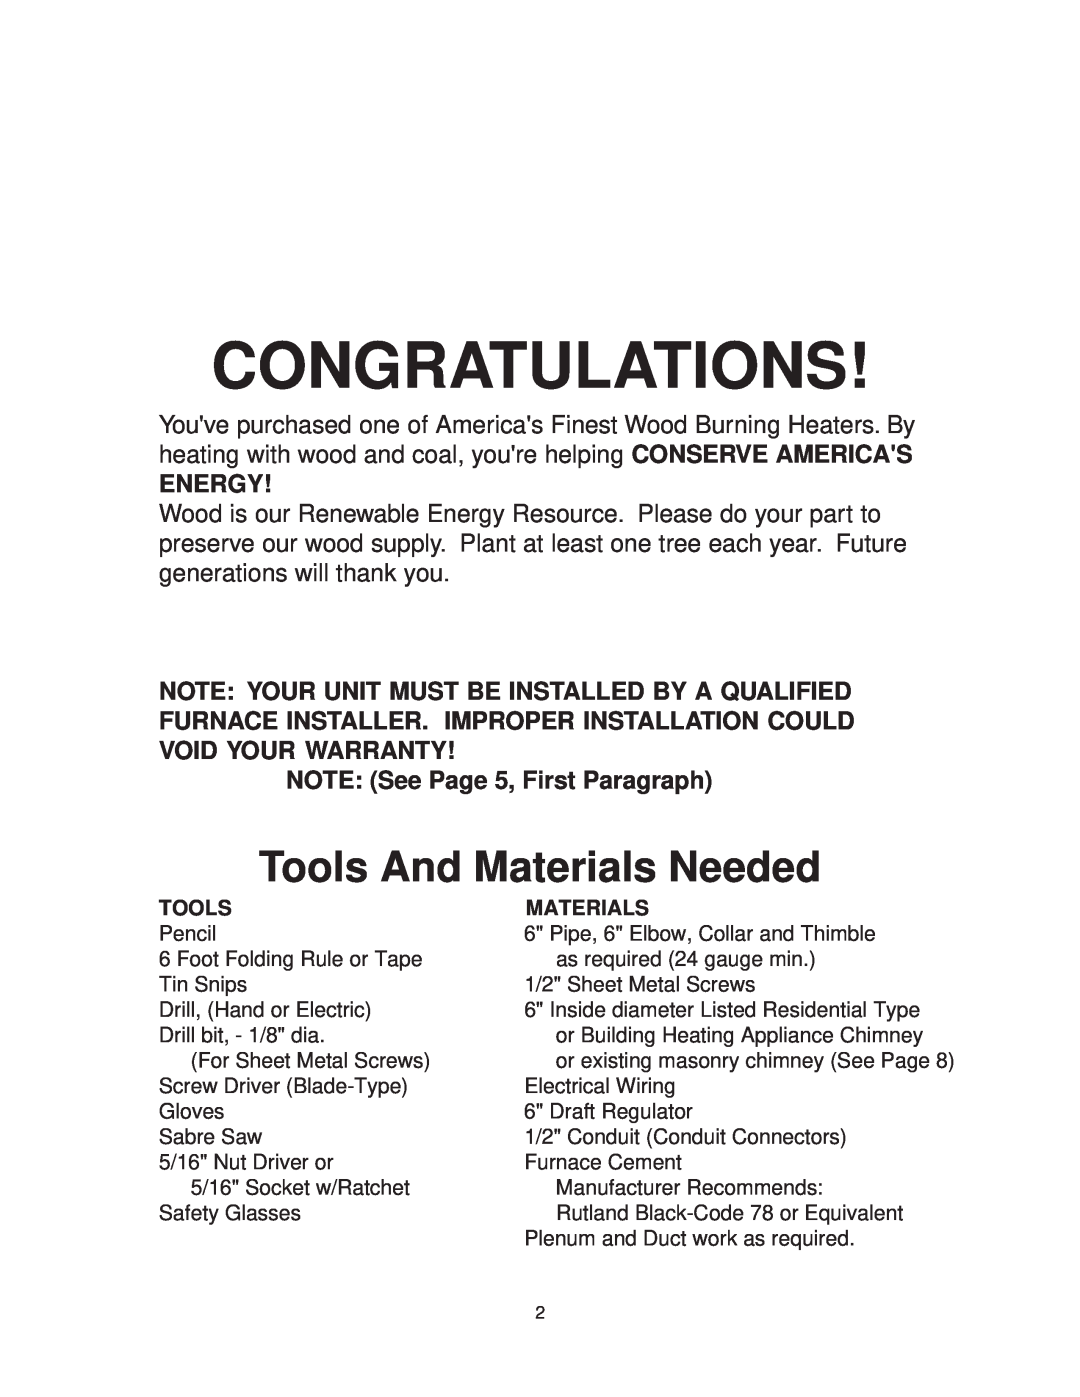 United States Stove 1303, AIR warranty Tools And Materials Needed, Energy, NOTE See Page 5, First Paragraph, Congratulations 